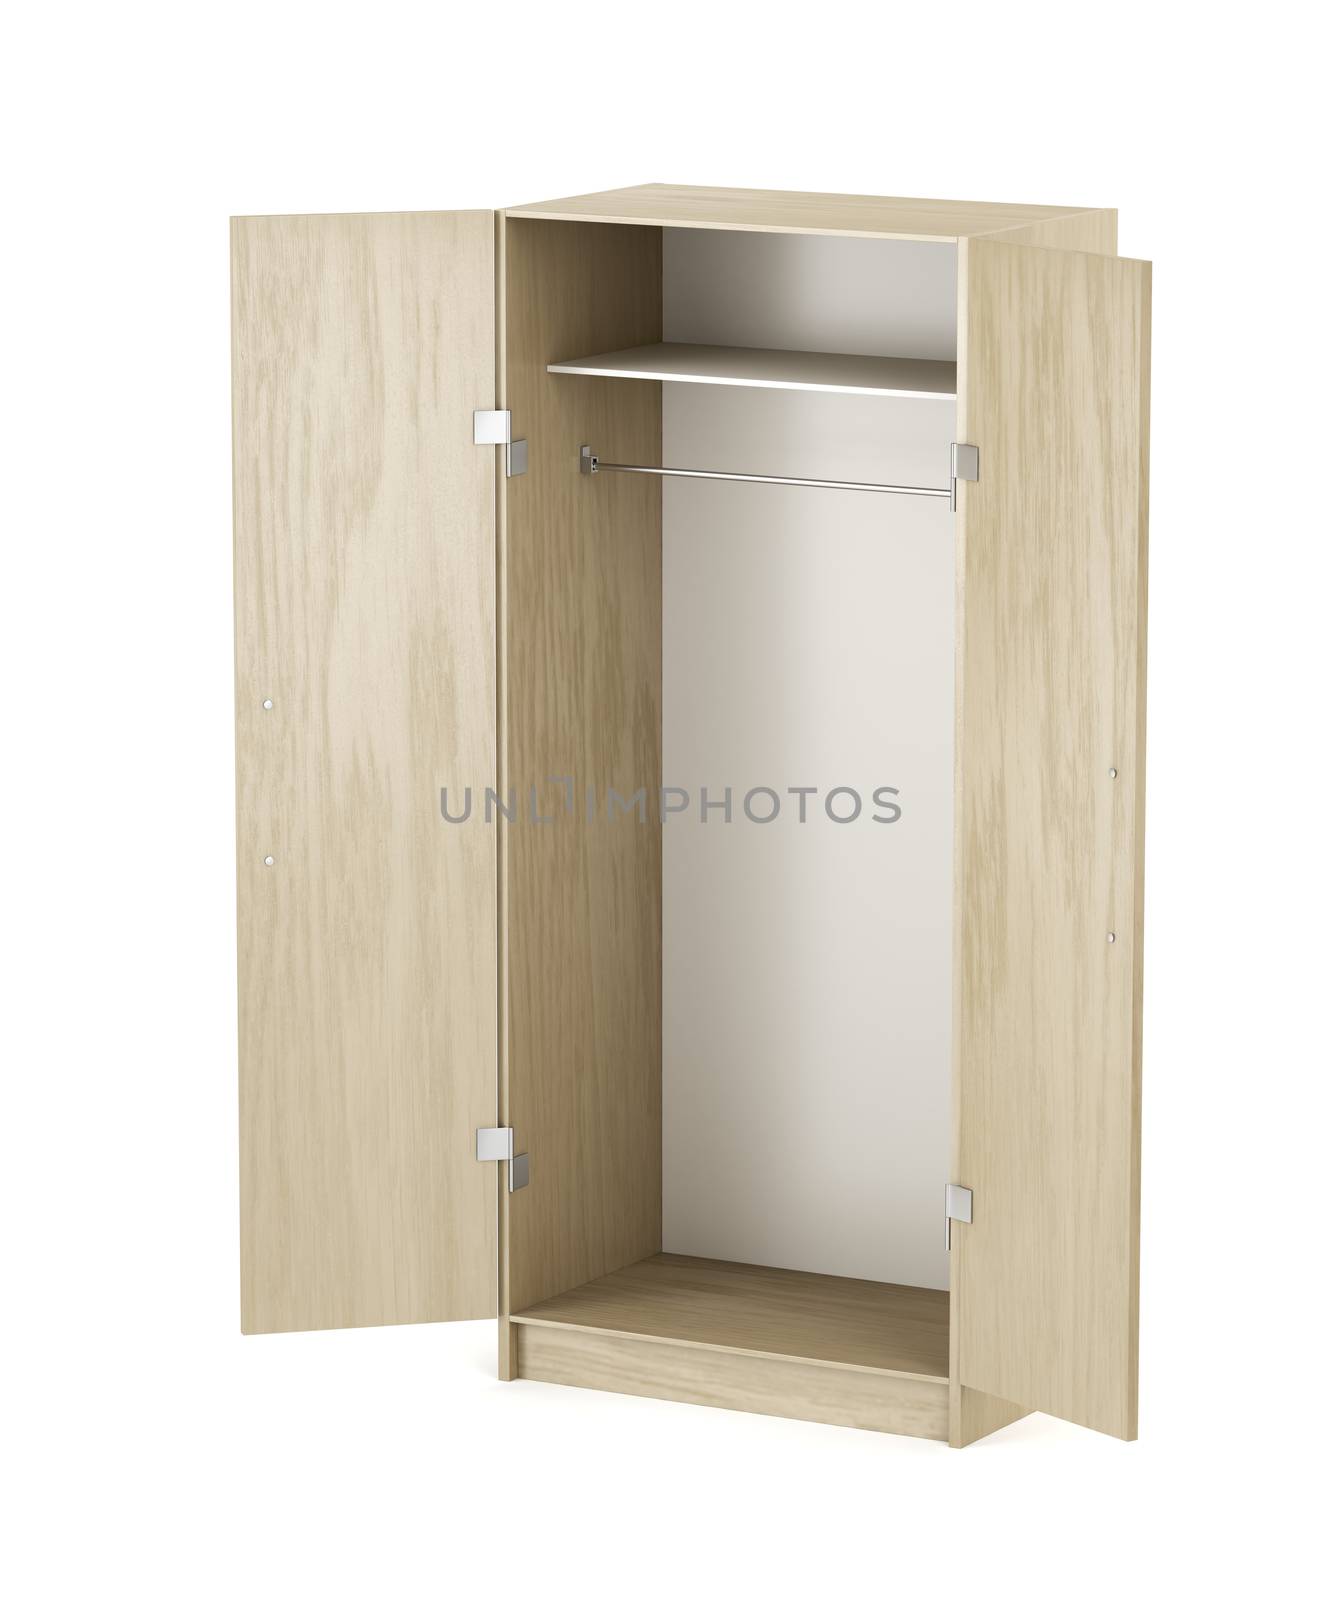 Empty wardrobe on white background by magraphics